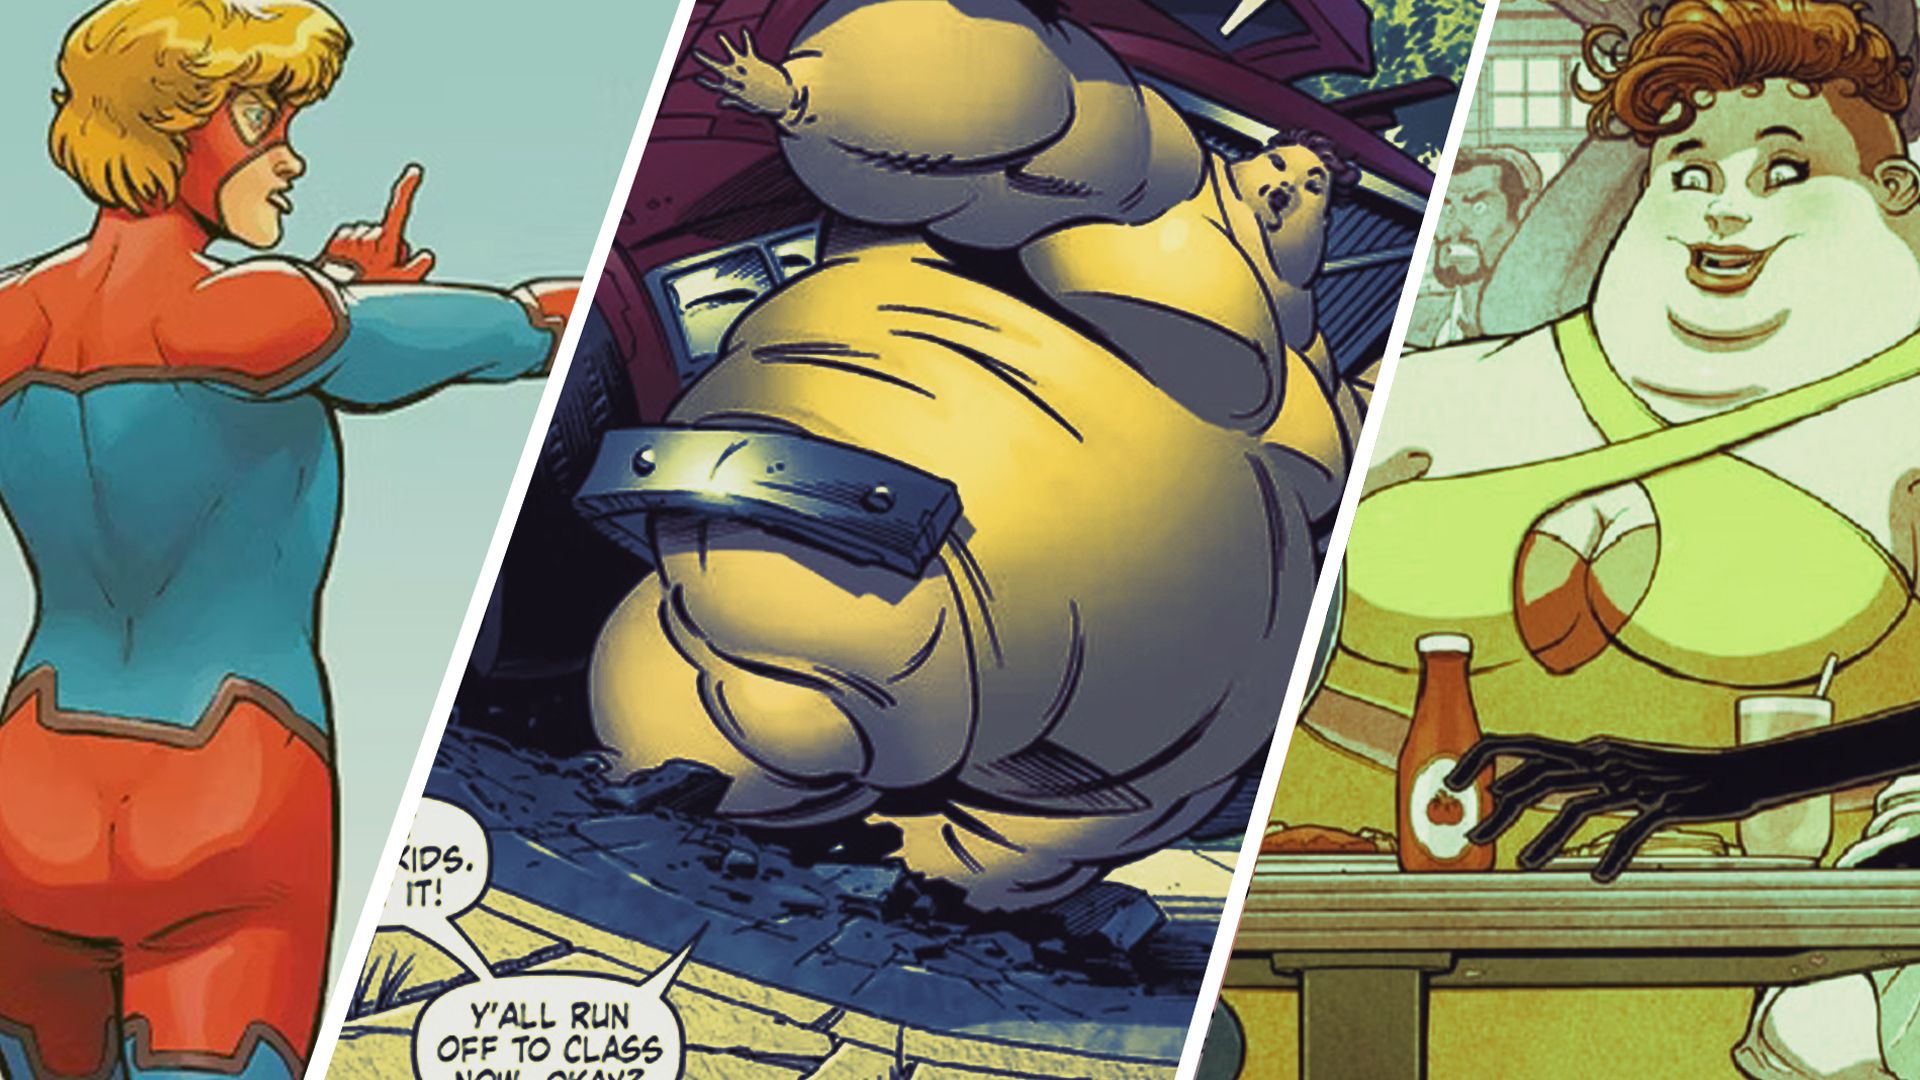 An edited image of different characters from the Great Lakes Avengers Marvel comics